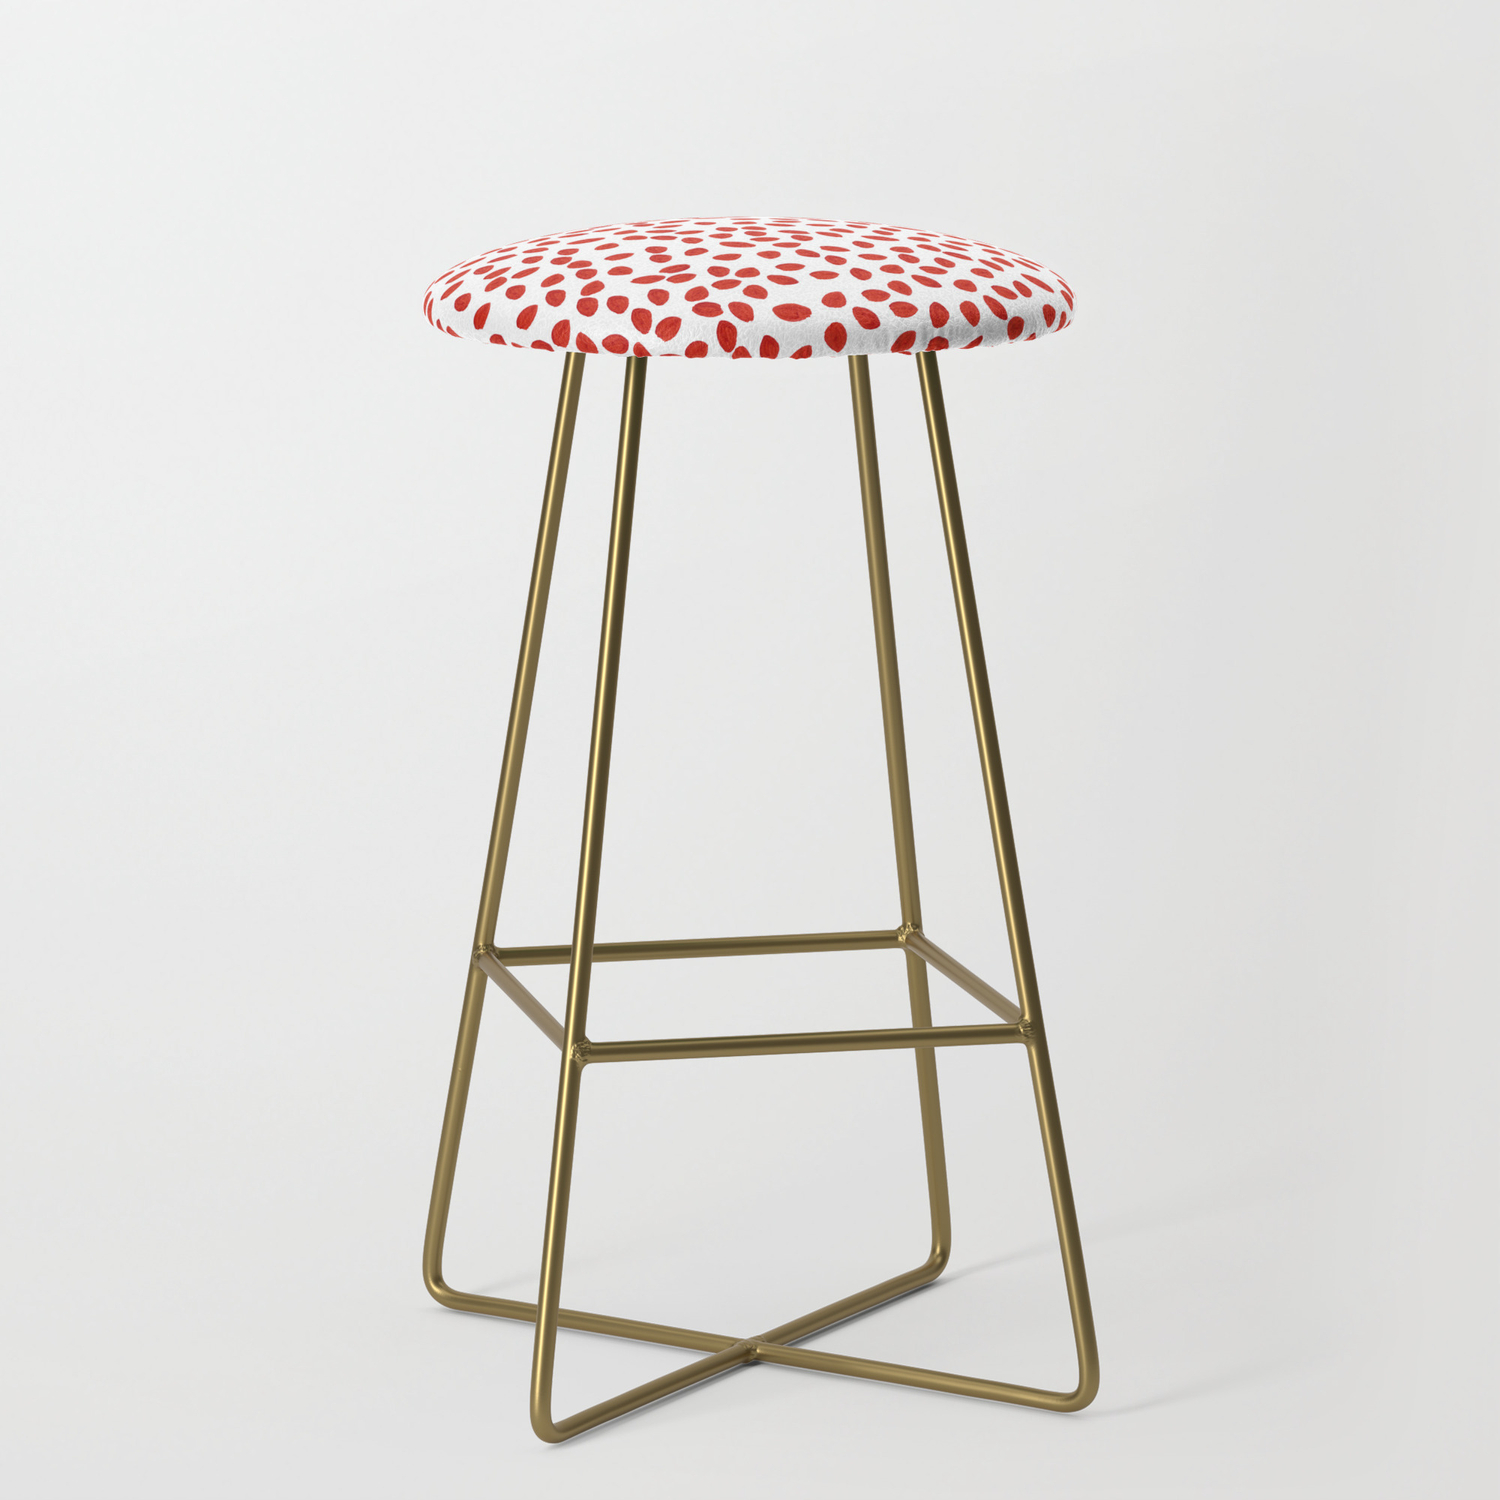 Red Acrylic Petals Uneven Pattern Bar, Red Acrylic Bar Stools